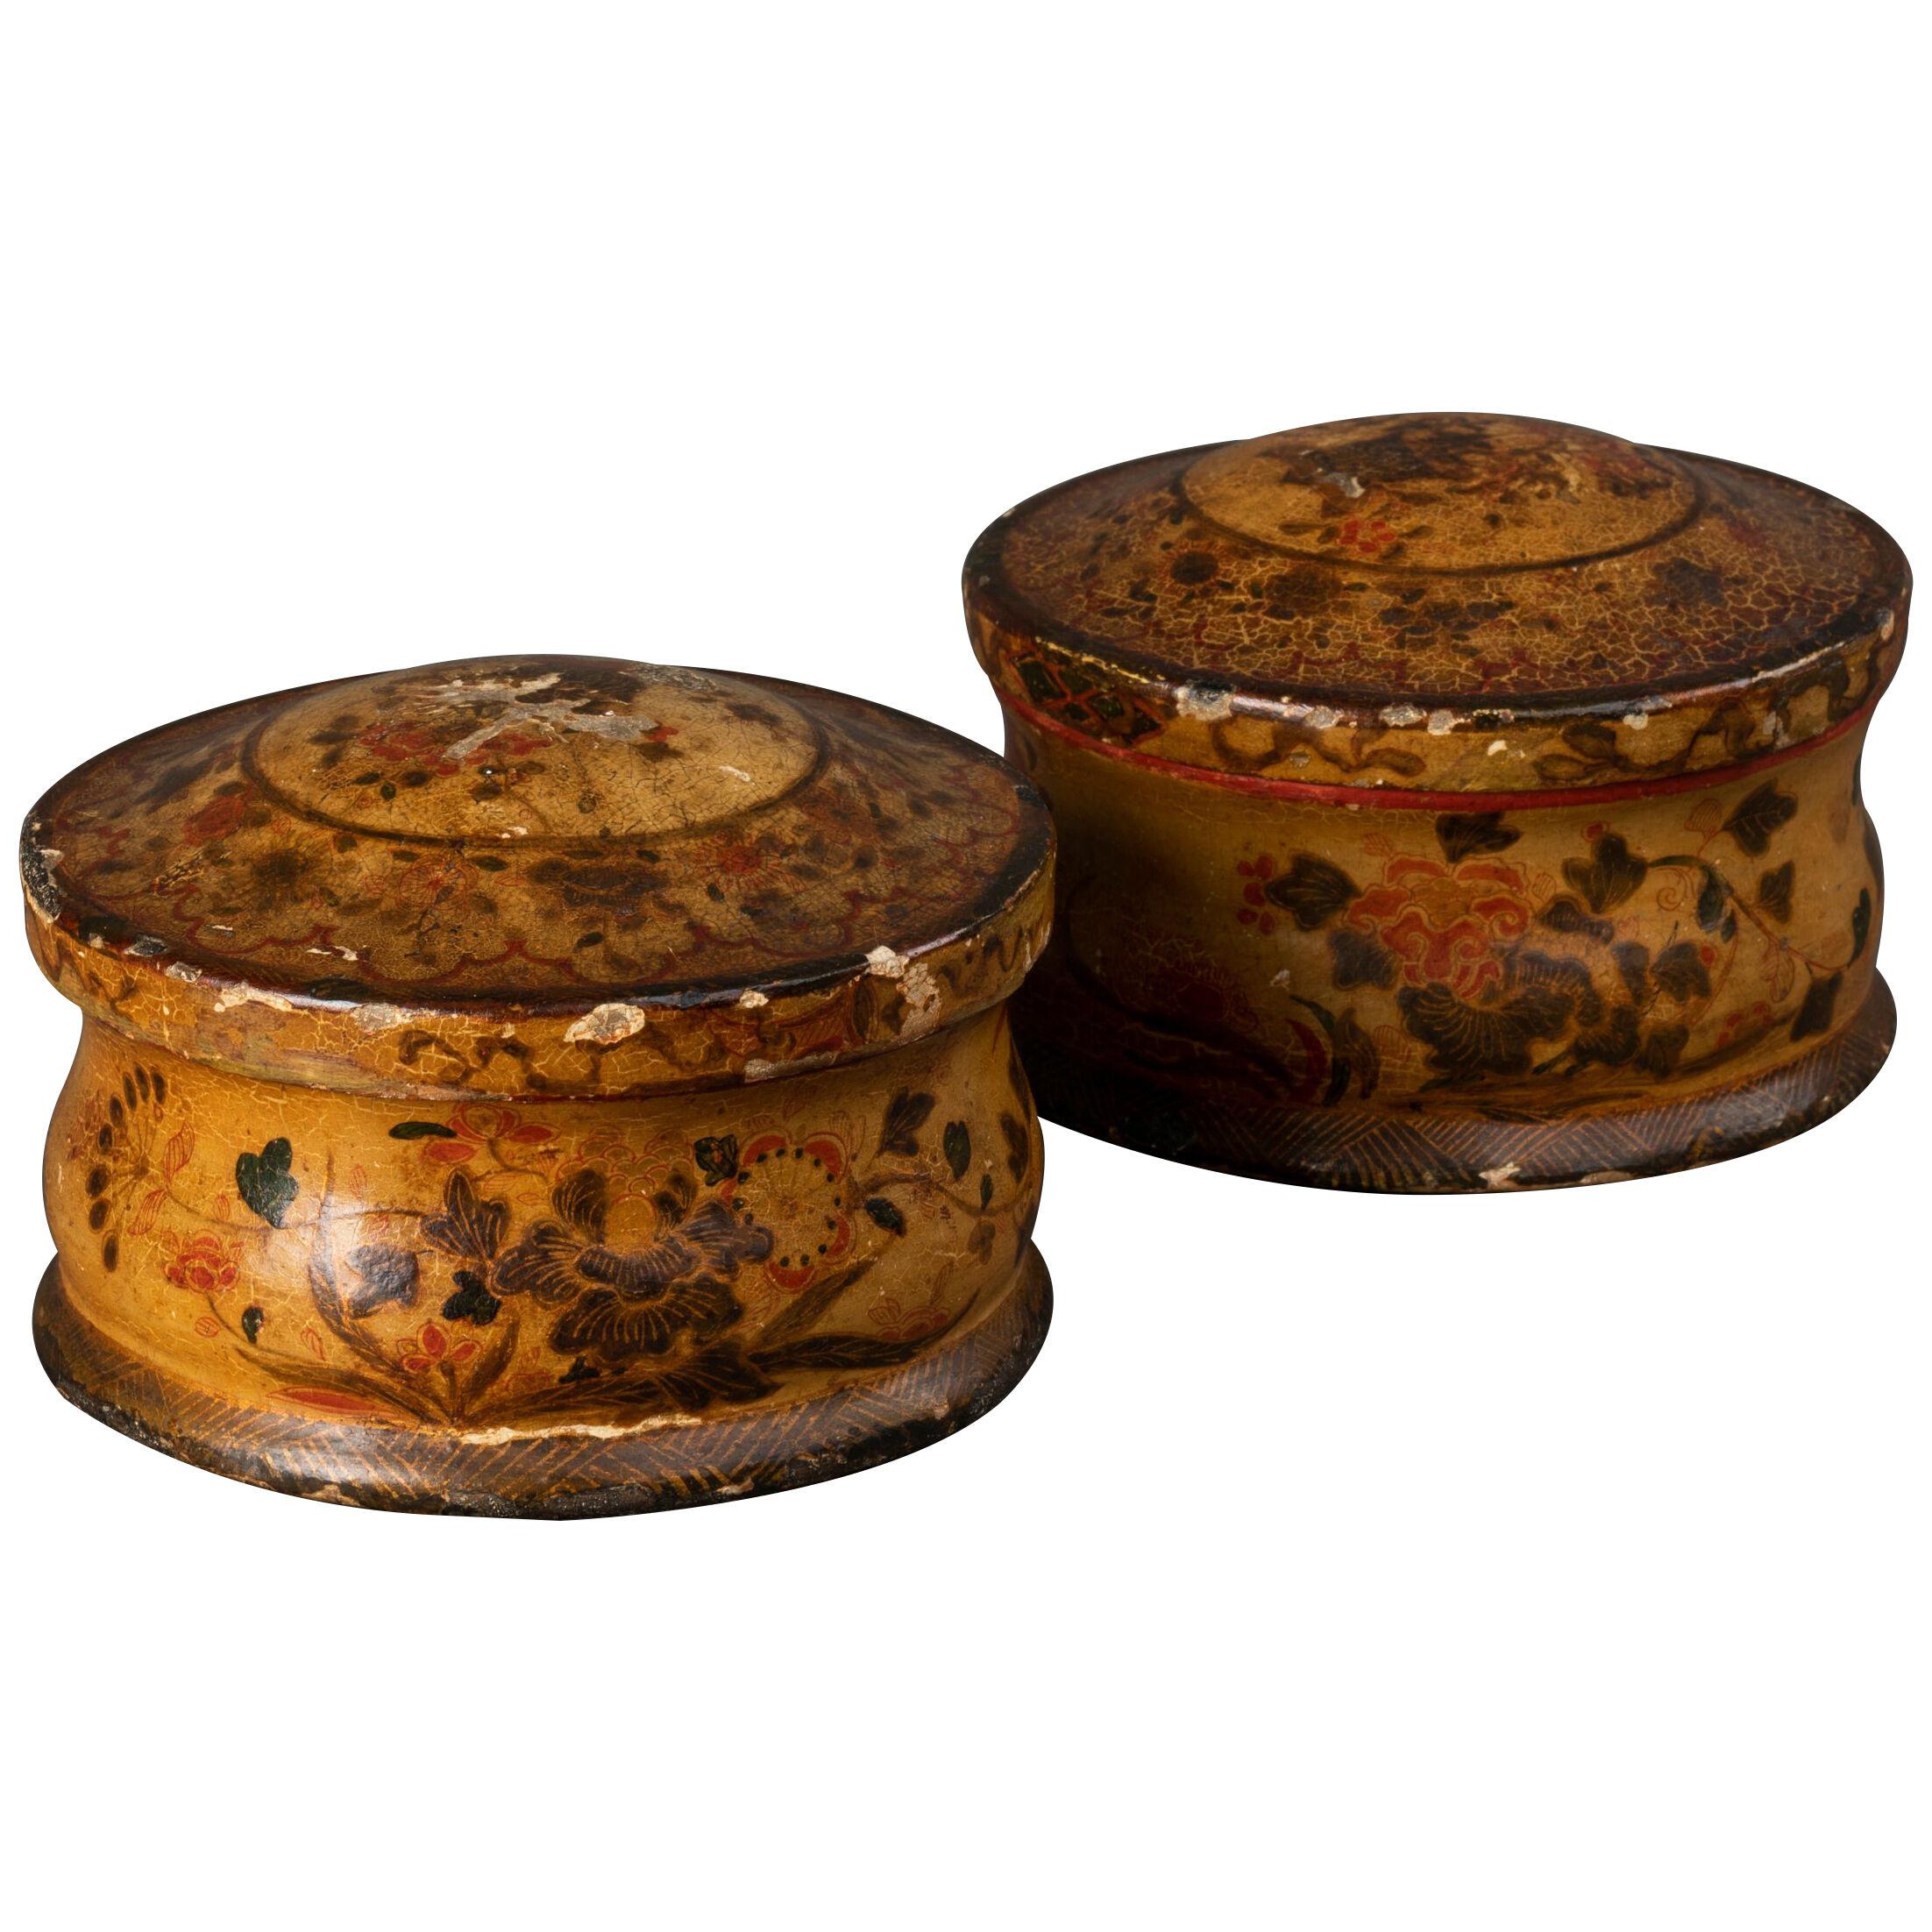 Pair of cartapesta boxes - Italy - early 18th century